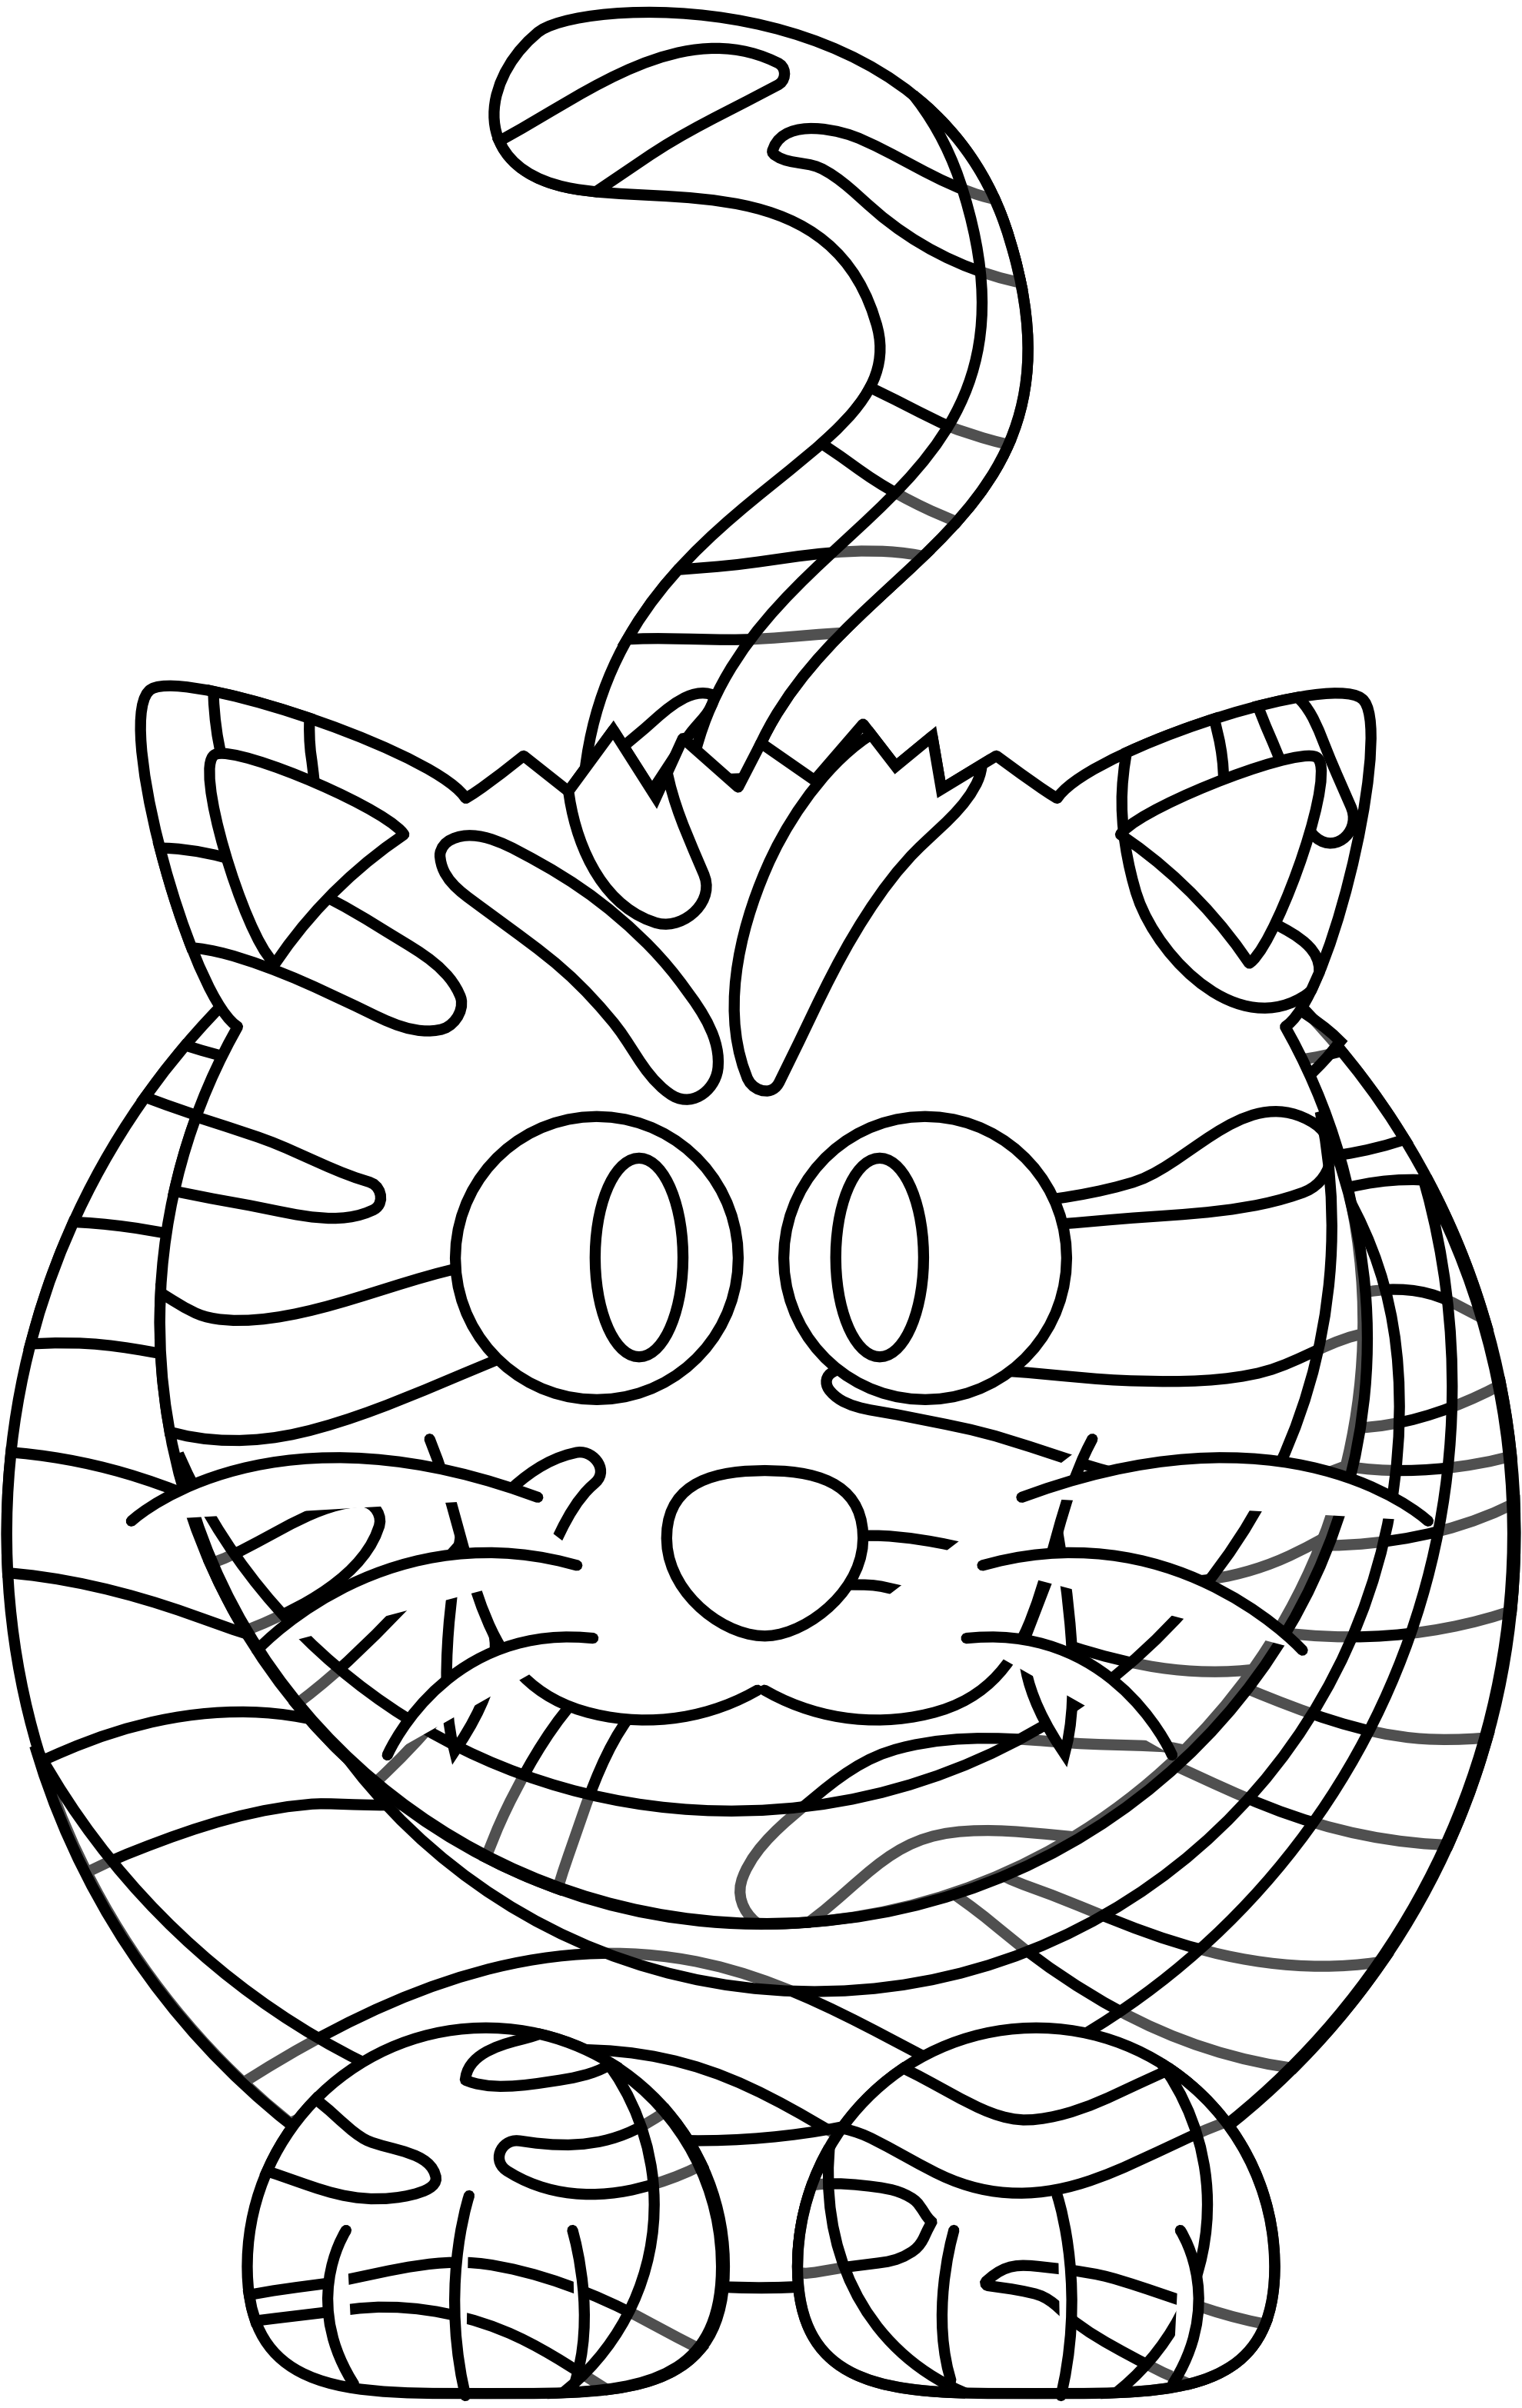 clipart tiger black and white - photo #43